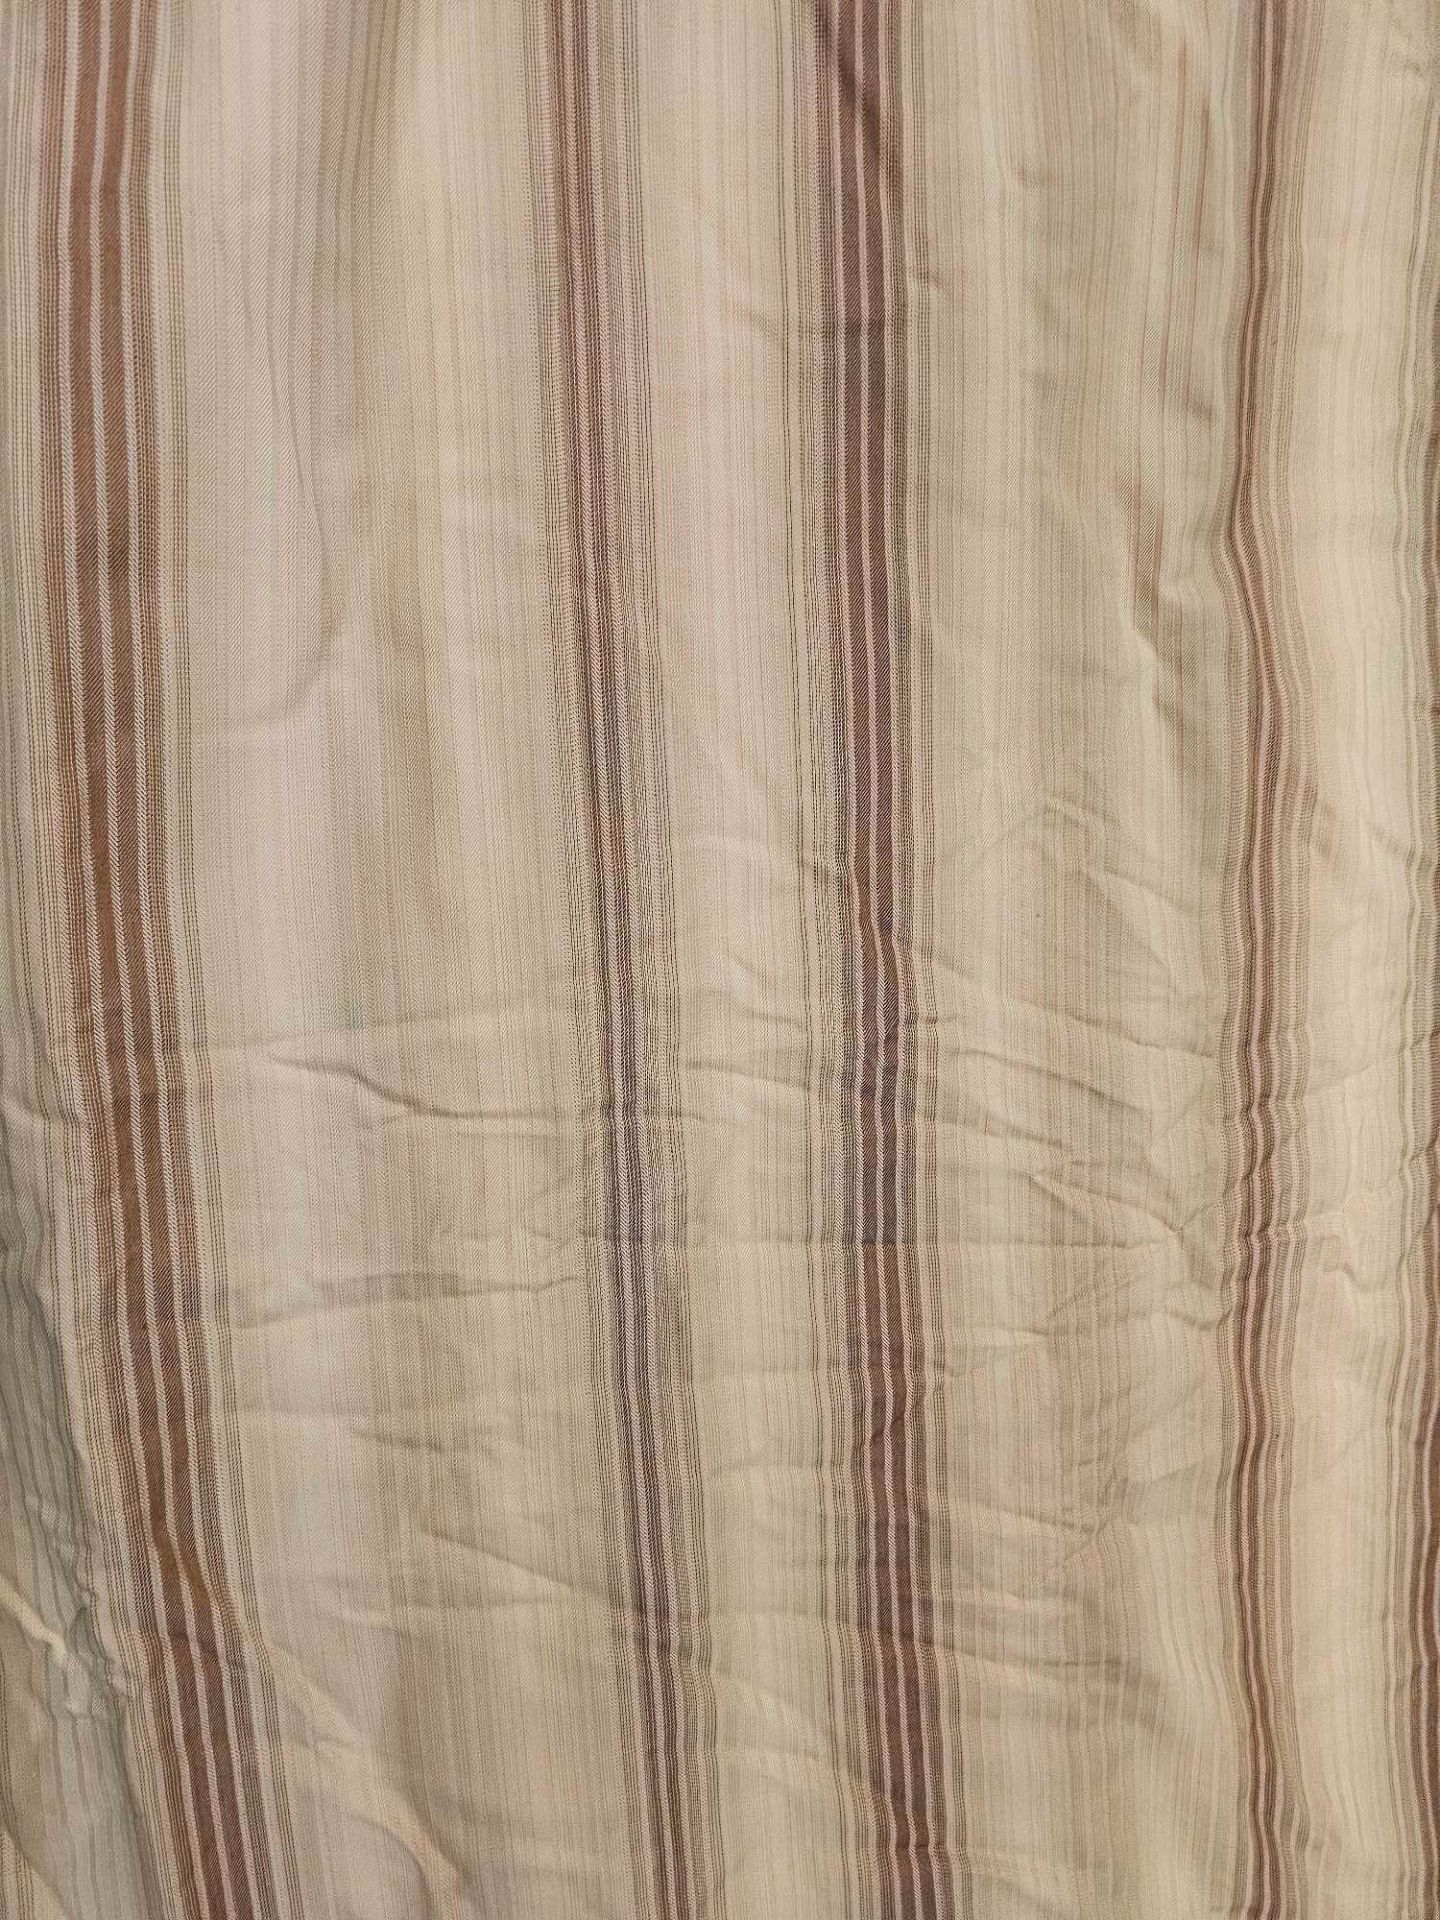 A Pair Silk Drapes Gold /Brown Stripes Size -cm 130 x 285 Ref Dorch 52 - Image 3 of 3